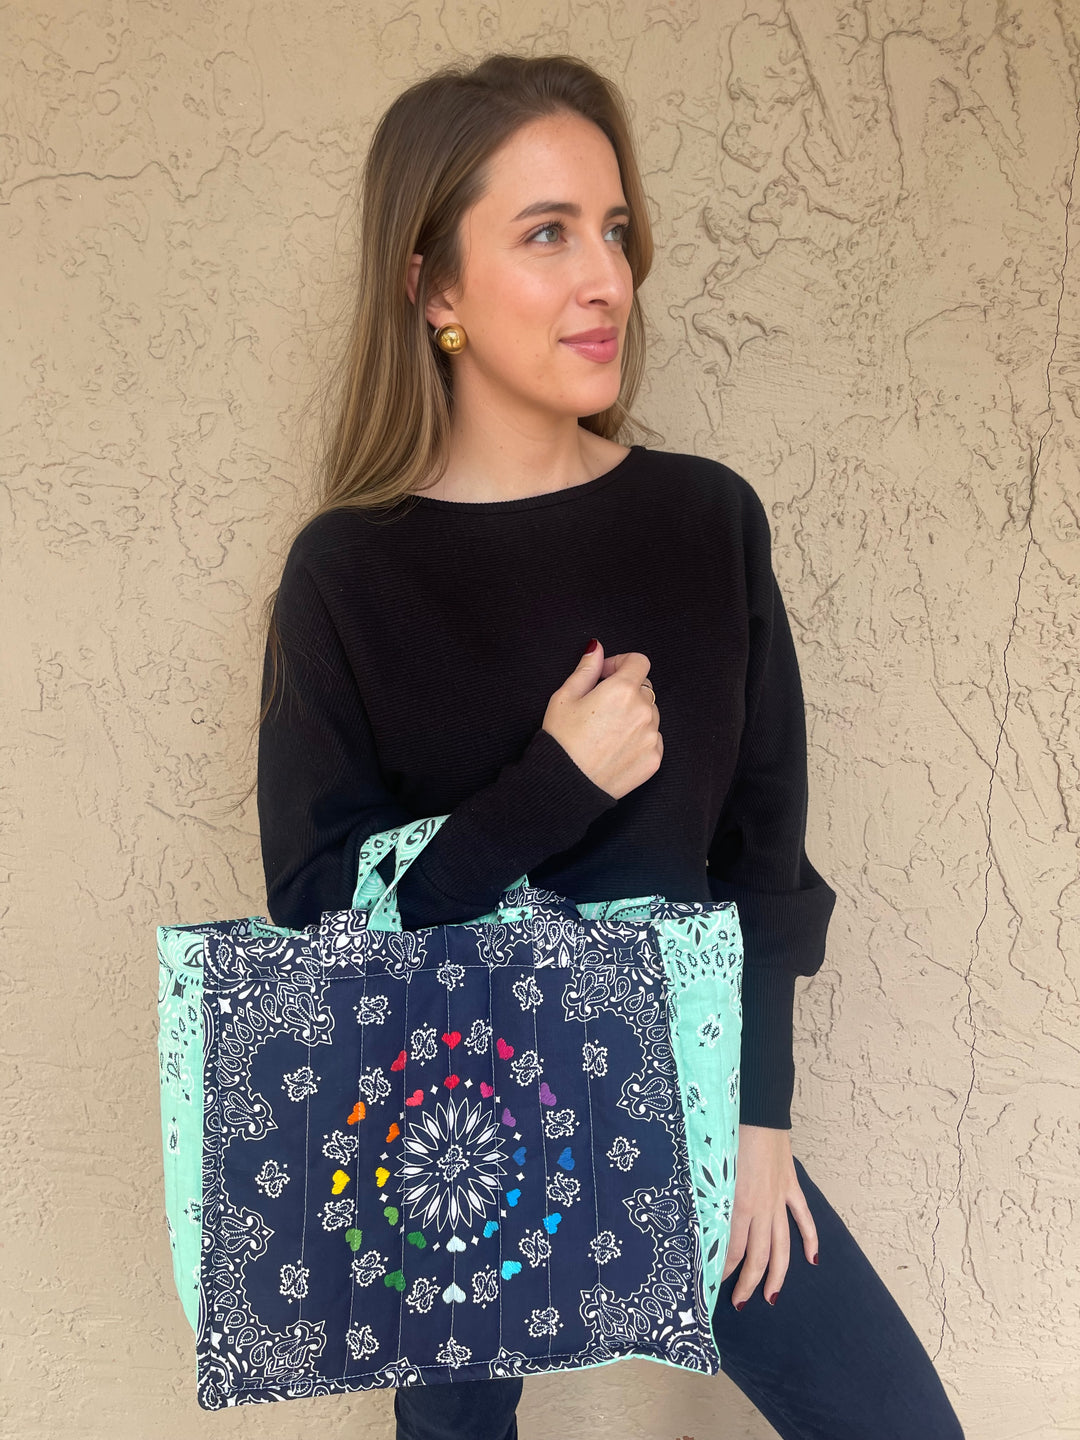 CALL IT BY YOUR NAME Medium Cabas Tote - HEARTS - Navy / Mint